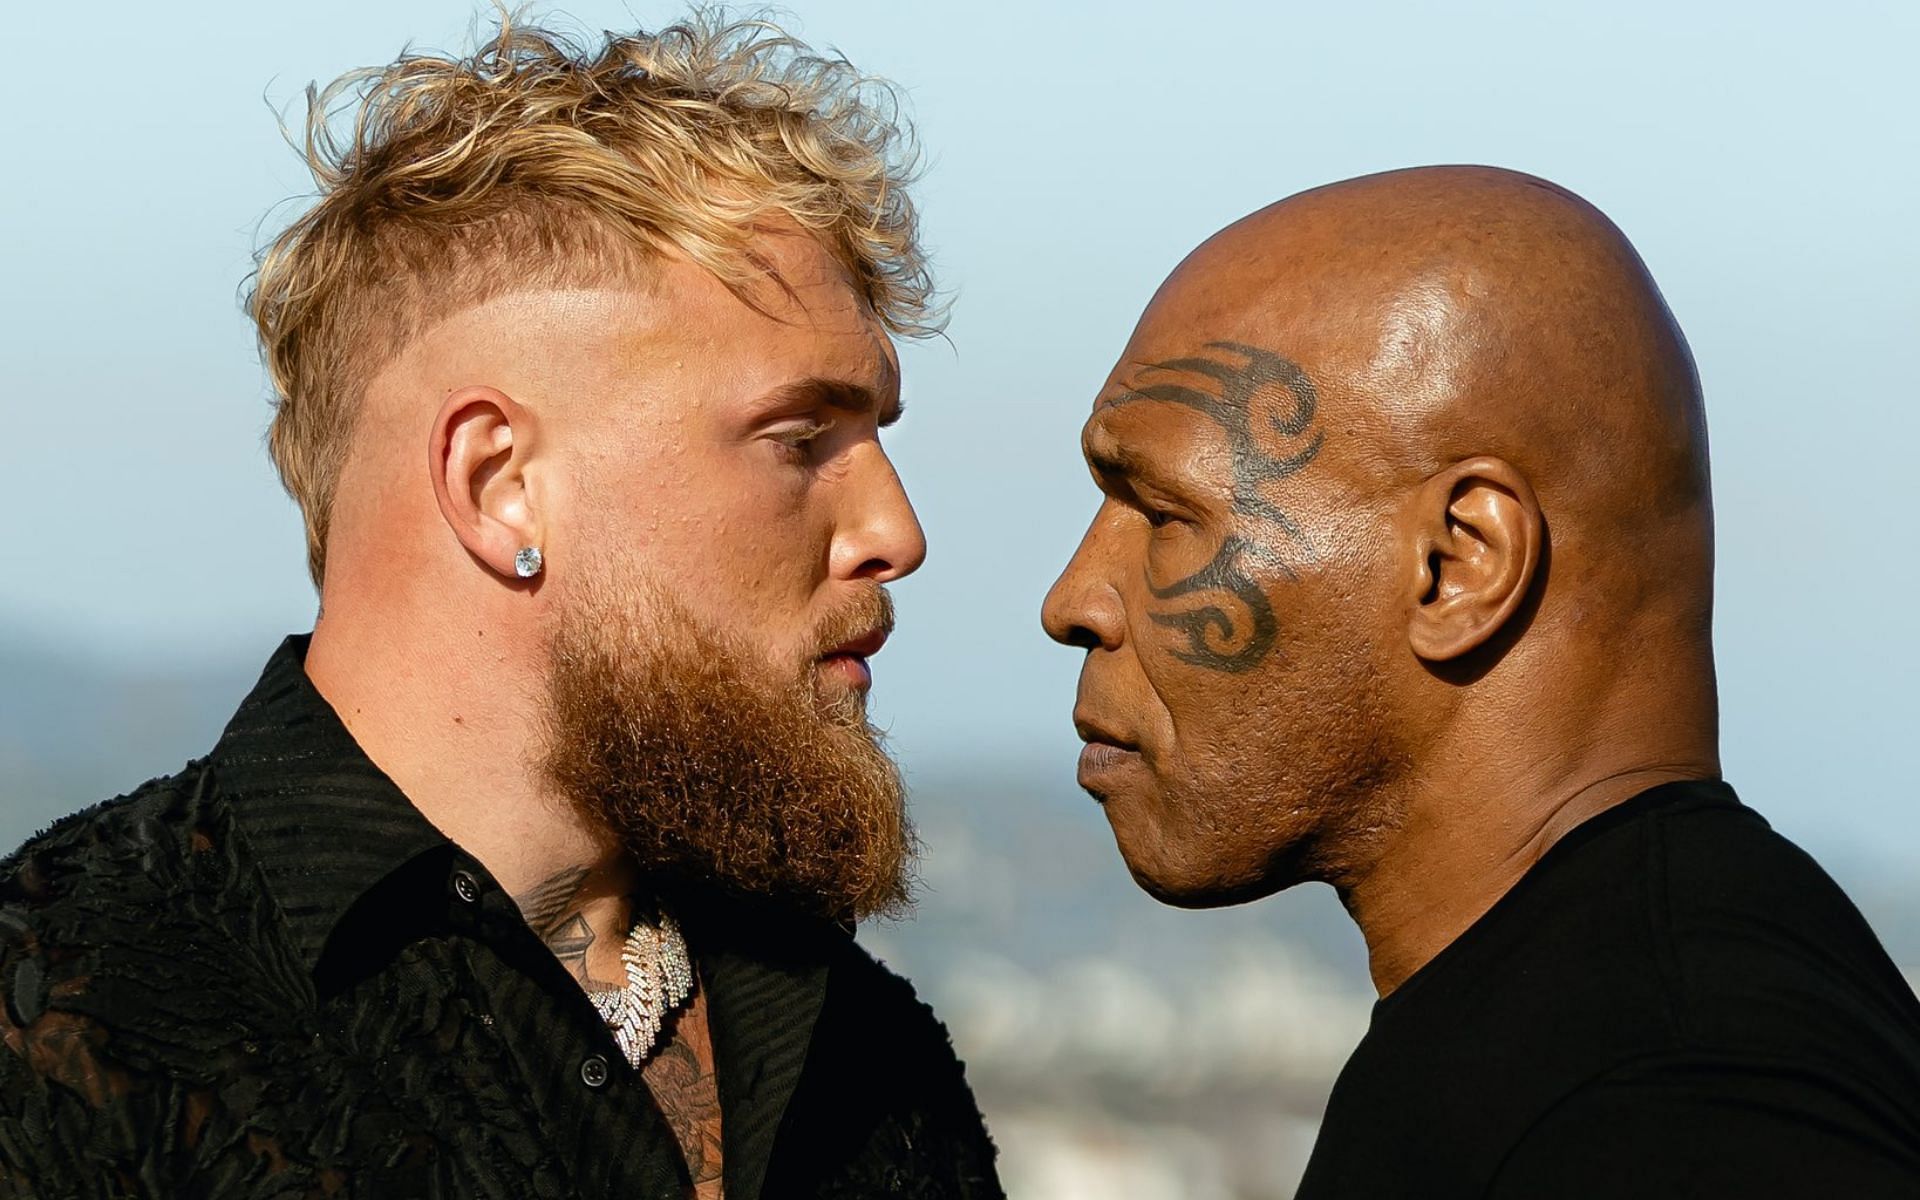 UFC legend questions why Jake Paul and Mike Tyson are fighting [Image courtesy: @jakepaul - X]